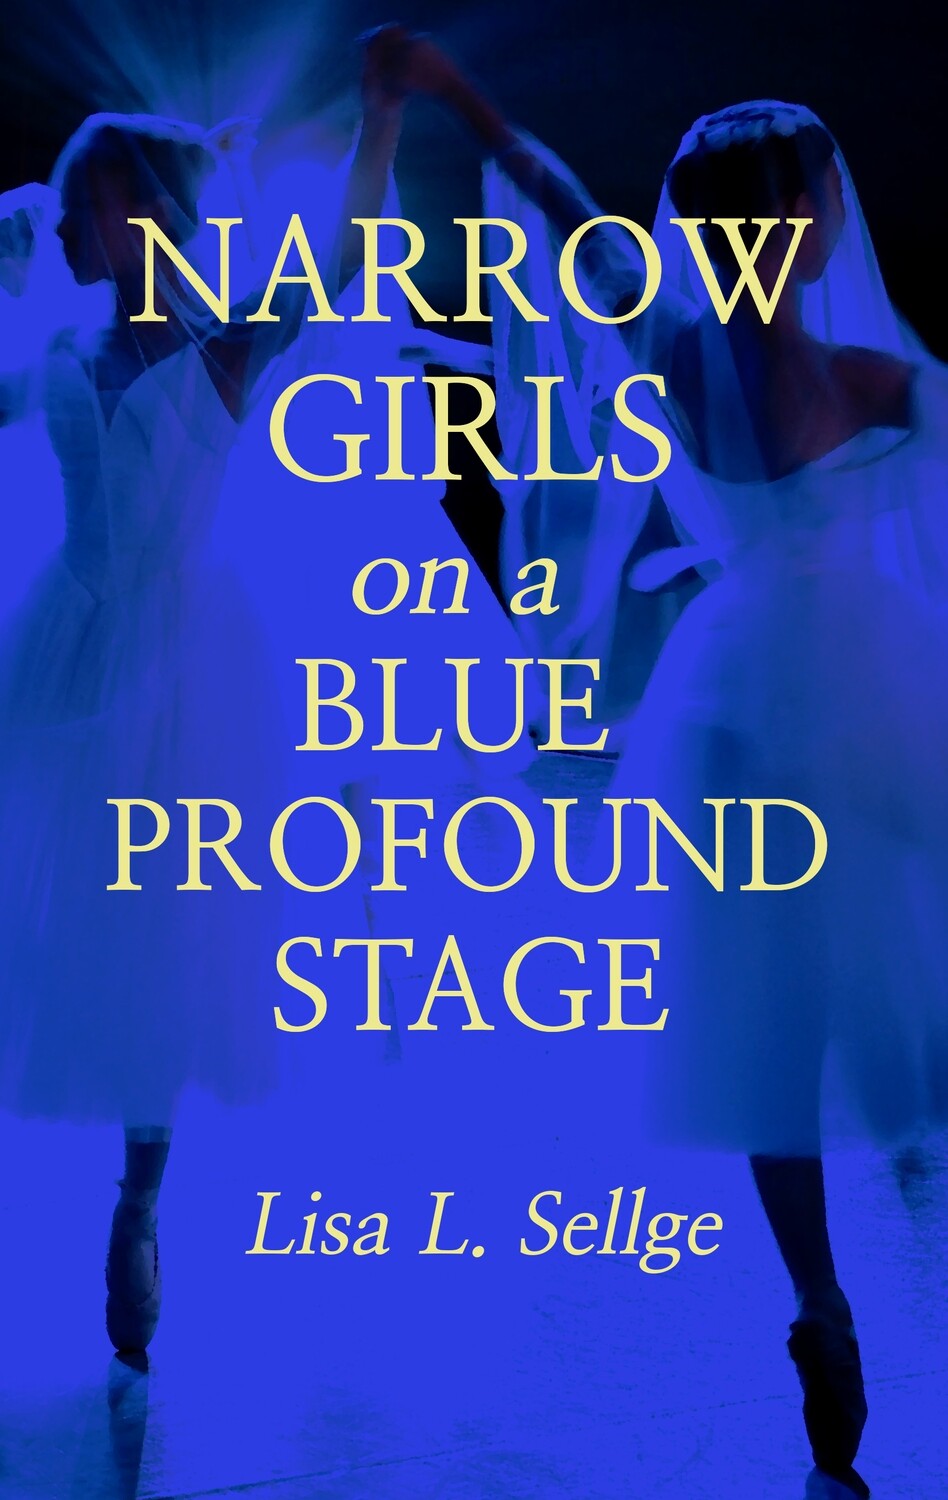 Narrow Girls on a Blue Profound Stage, by Lisa L. Sellge